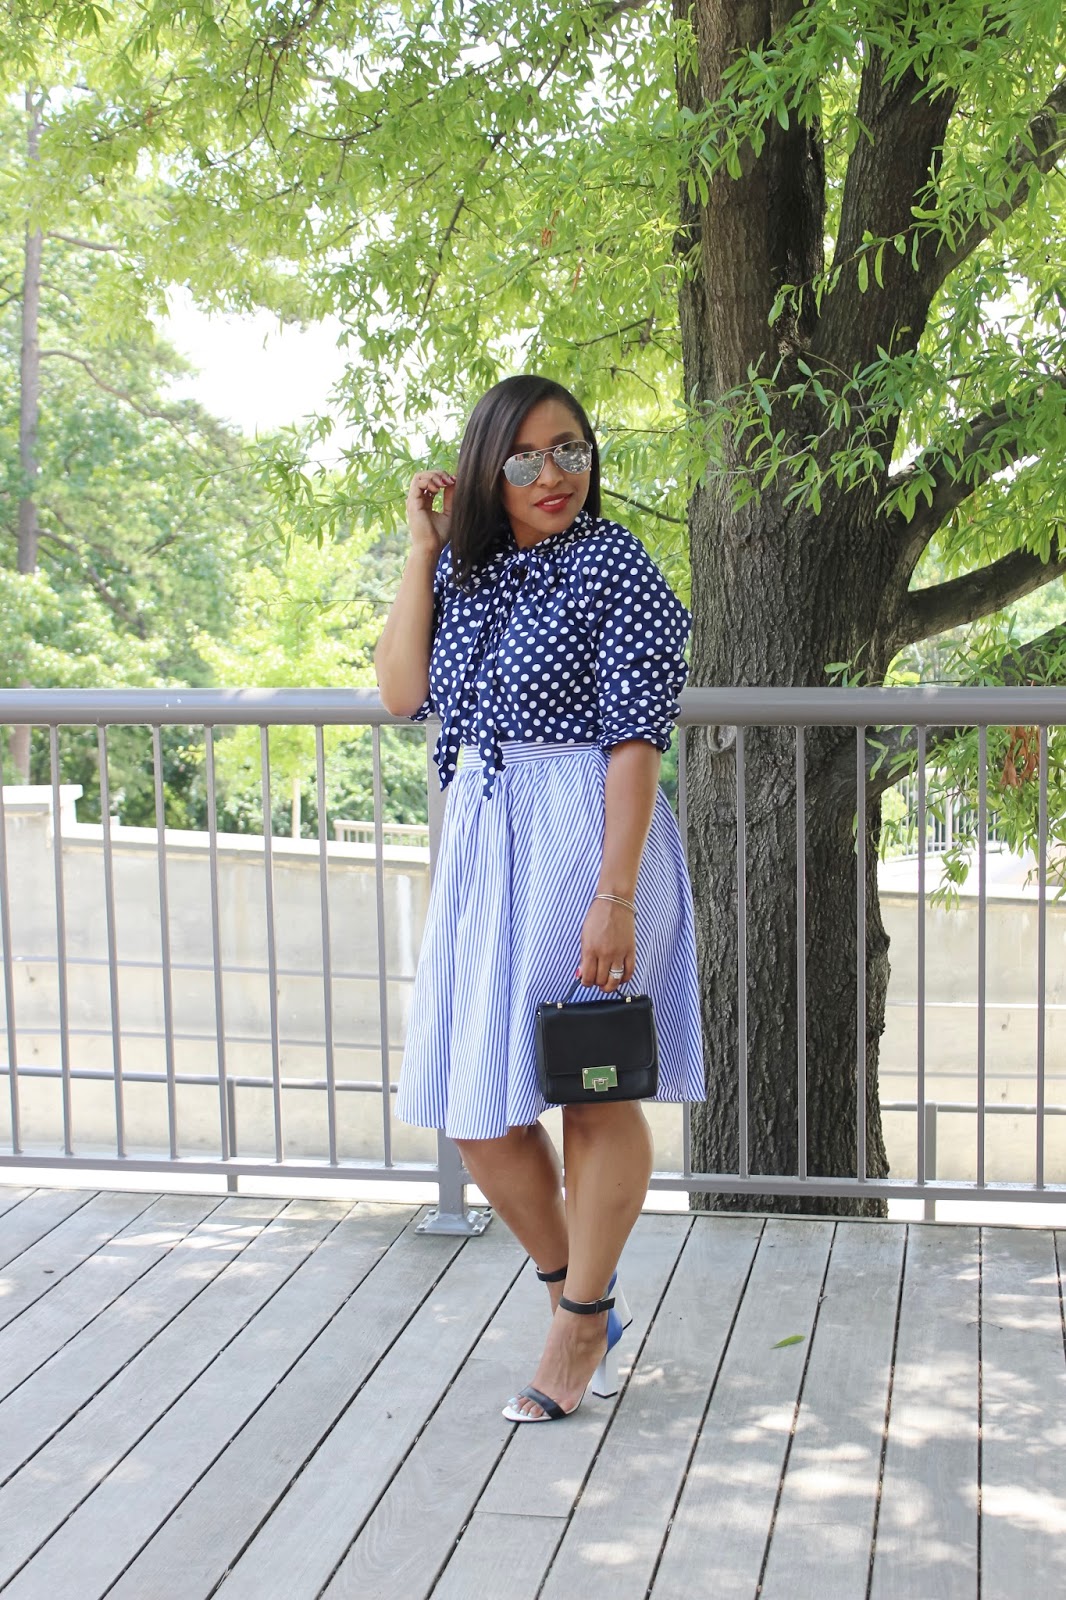 Shoes of prey, deisgn your own shoes, summer looks, dc blogger, twirl, blue outfits, midi skirt, striped shirt, ankle strao heels, polka dot shirt, walking in the street